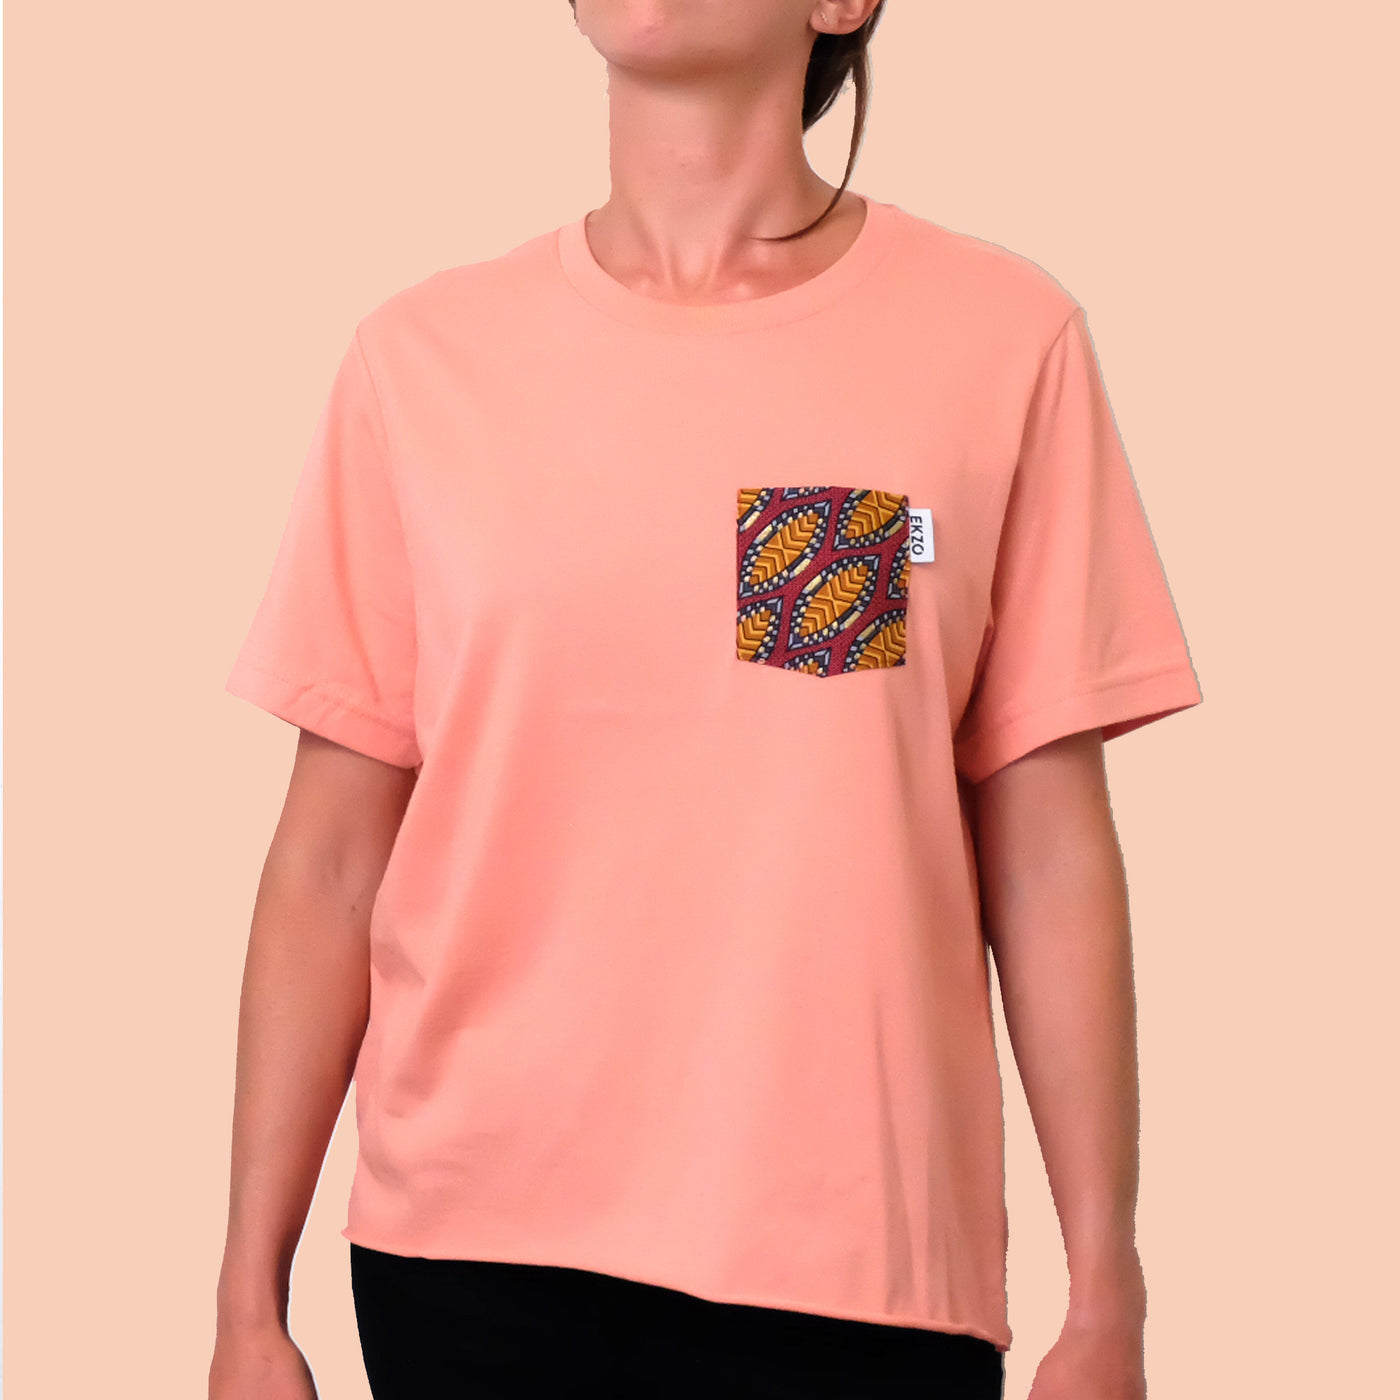 Woman wearing salmon colored t-shirt with African wax fabric chest pocket